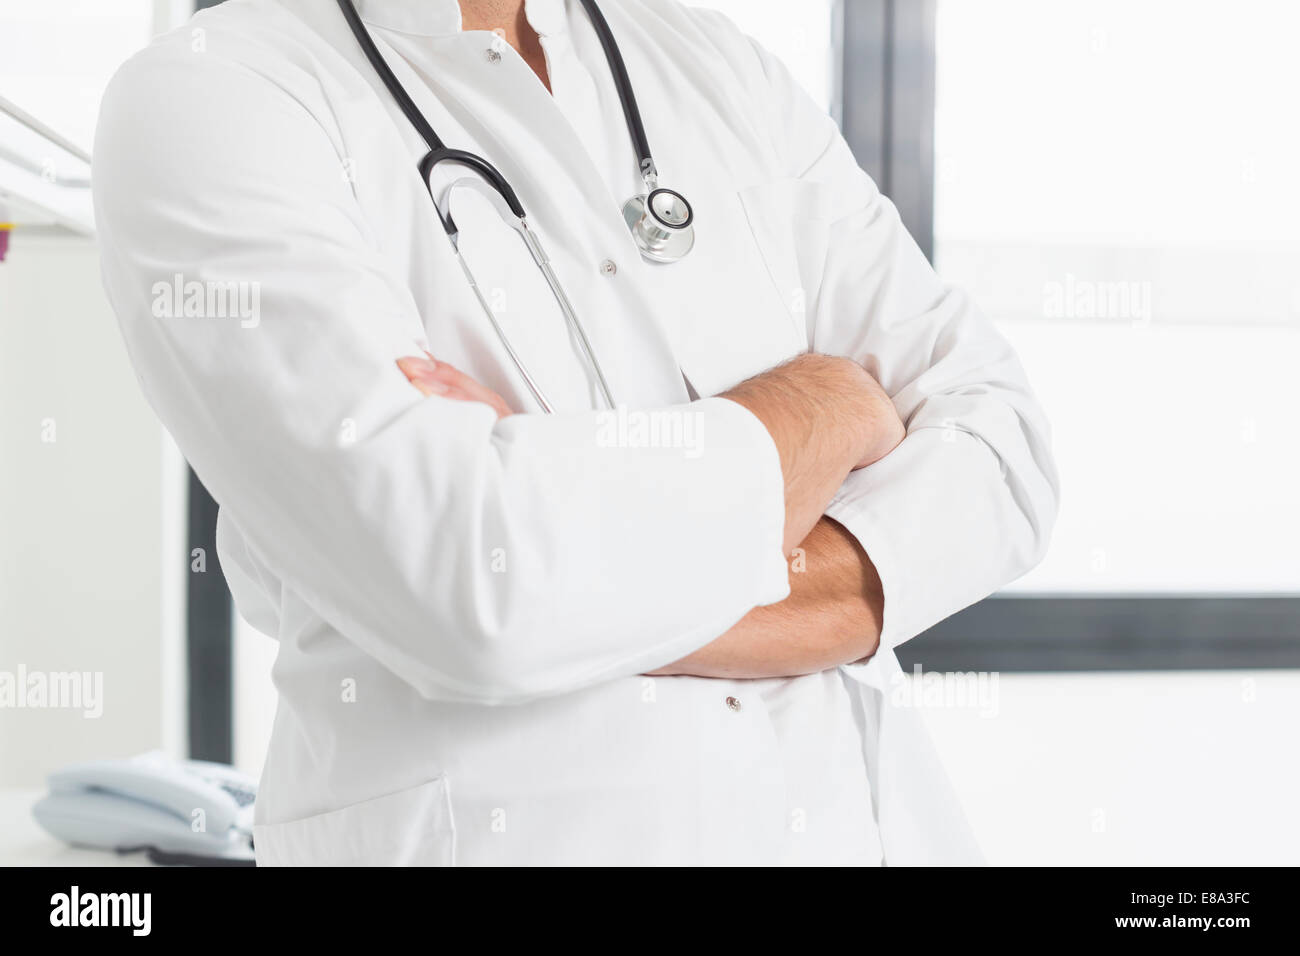 Doctor holding arms crossed, mid section Stock Photo